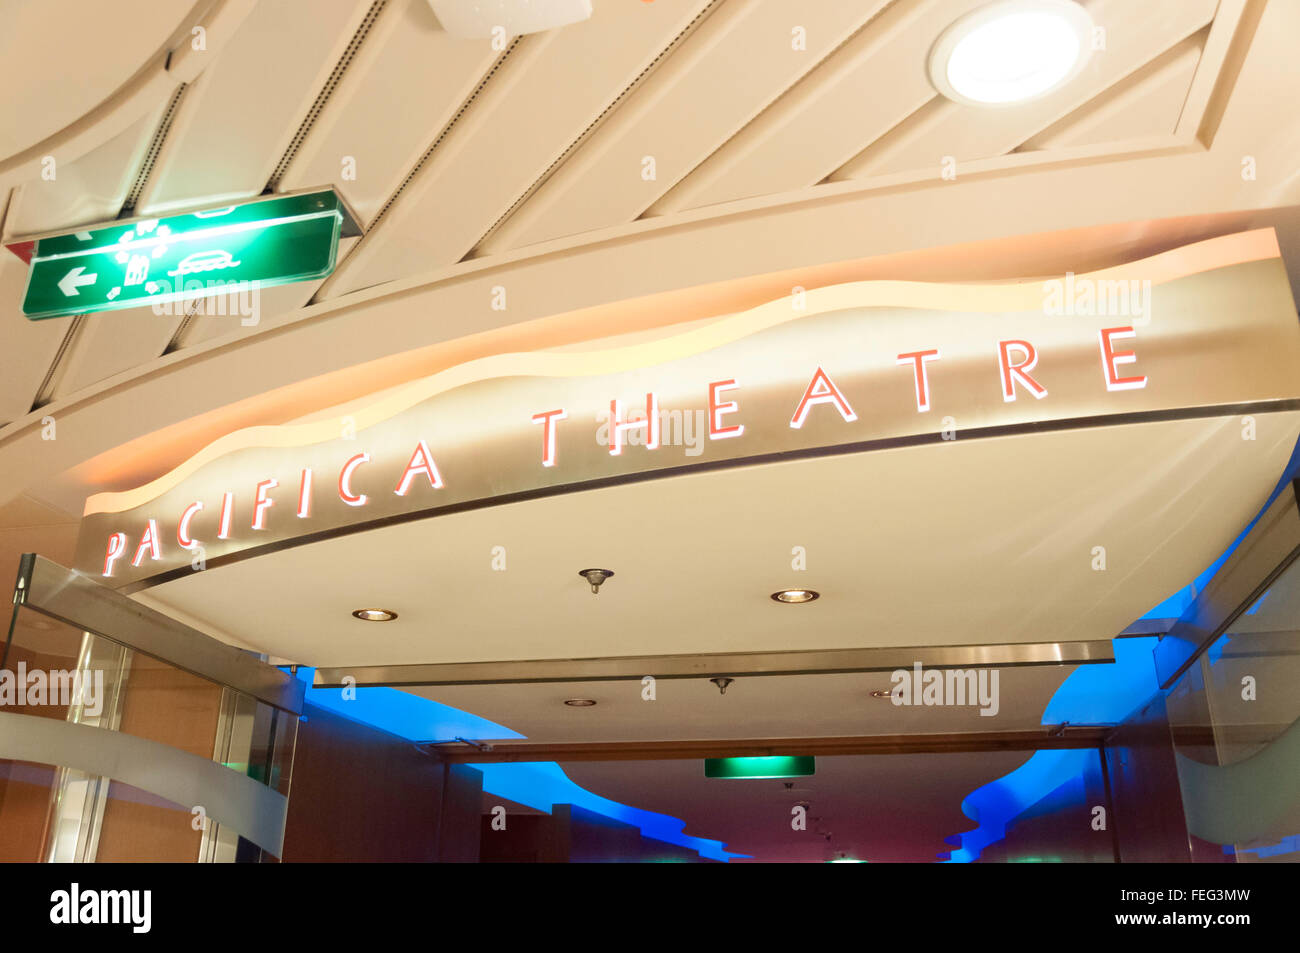 Entrance to Pacifica Theatre, Royal Caribbean's Brilliance of the Seas cruise ship, North Sea, Europe Stock Photo